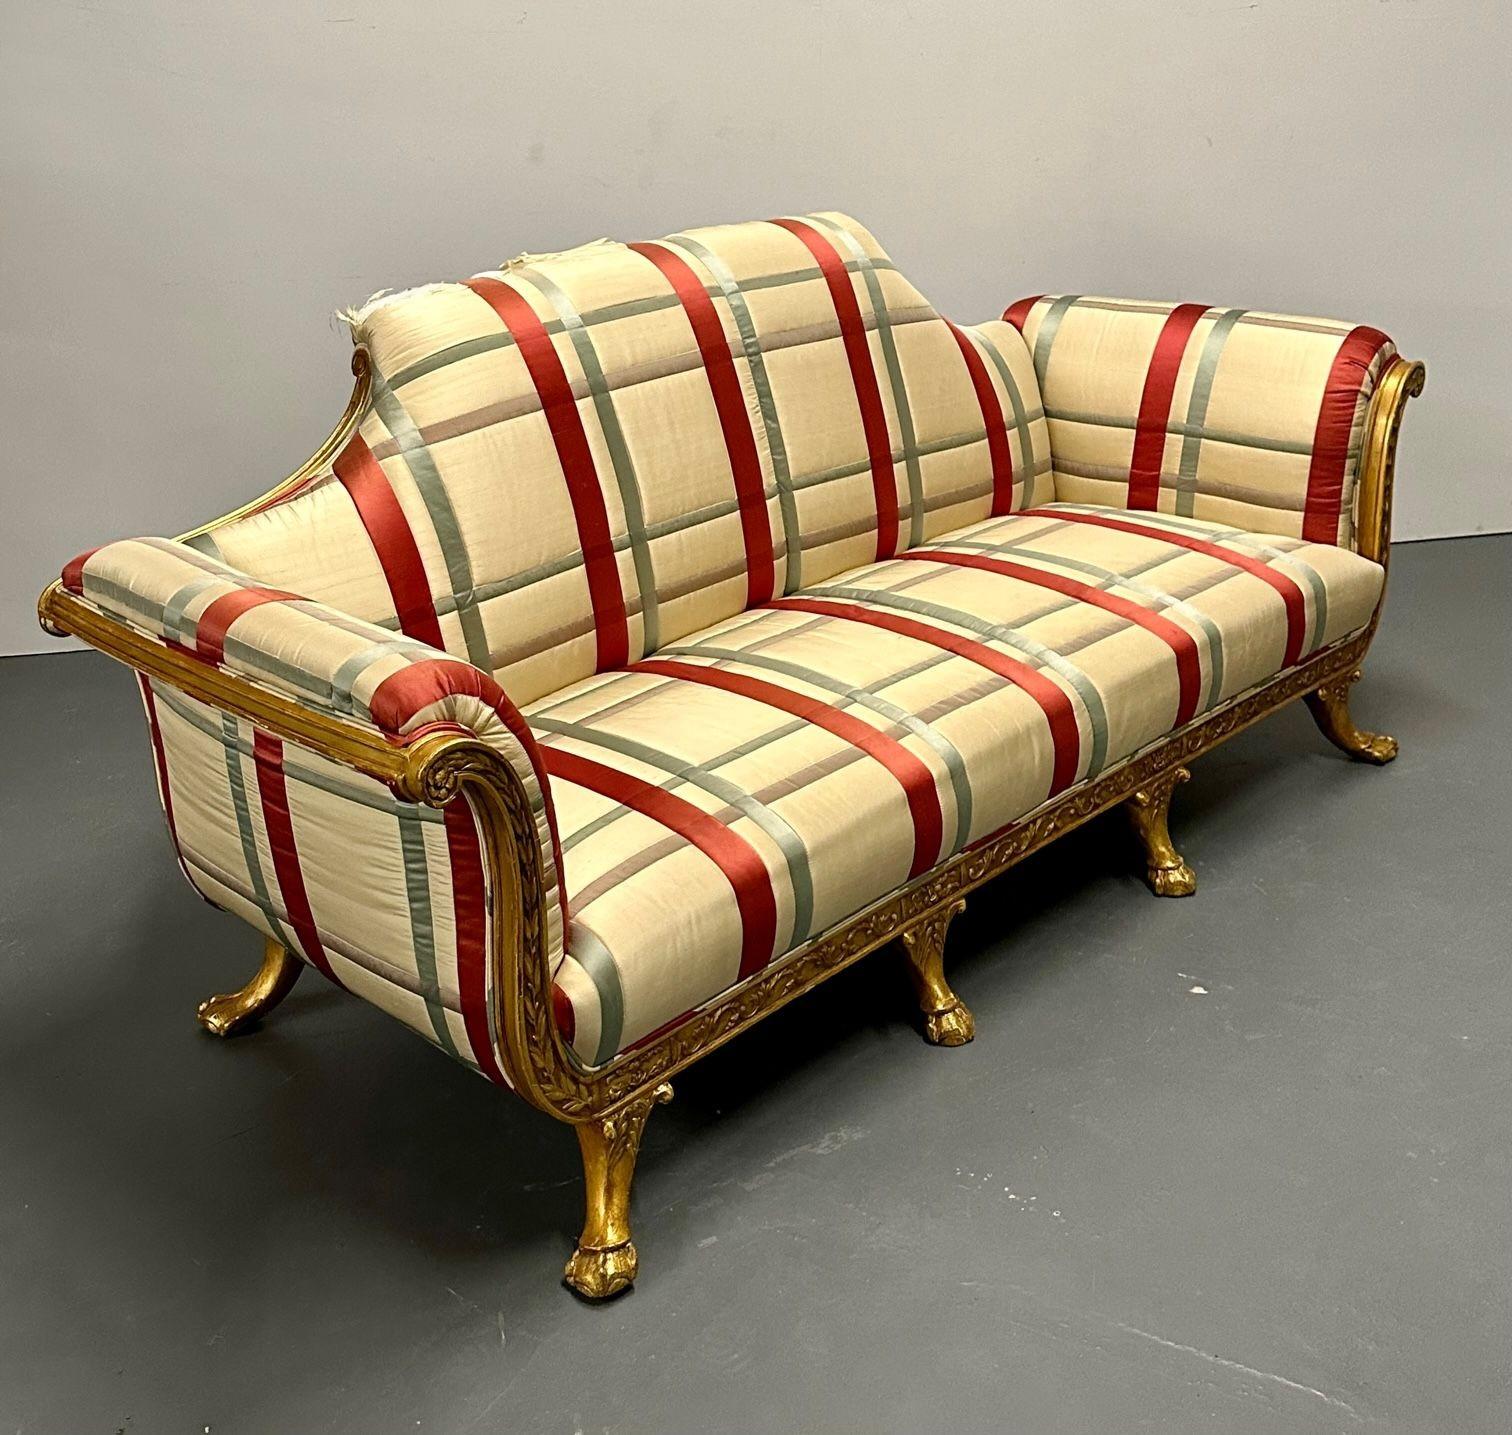 Hollywood Regency Eccentric Giltwood, Carved Sofa / Settee, Satin
 
This unusual sofa has a finely carved, 8-leg giltwood frame that features a dramatic camel back design.  Striped satin upholstery is striking but torn at the back.  Two generously